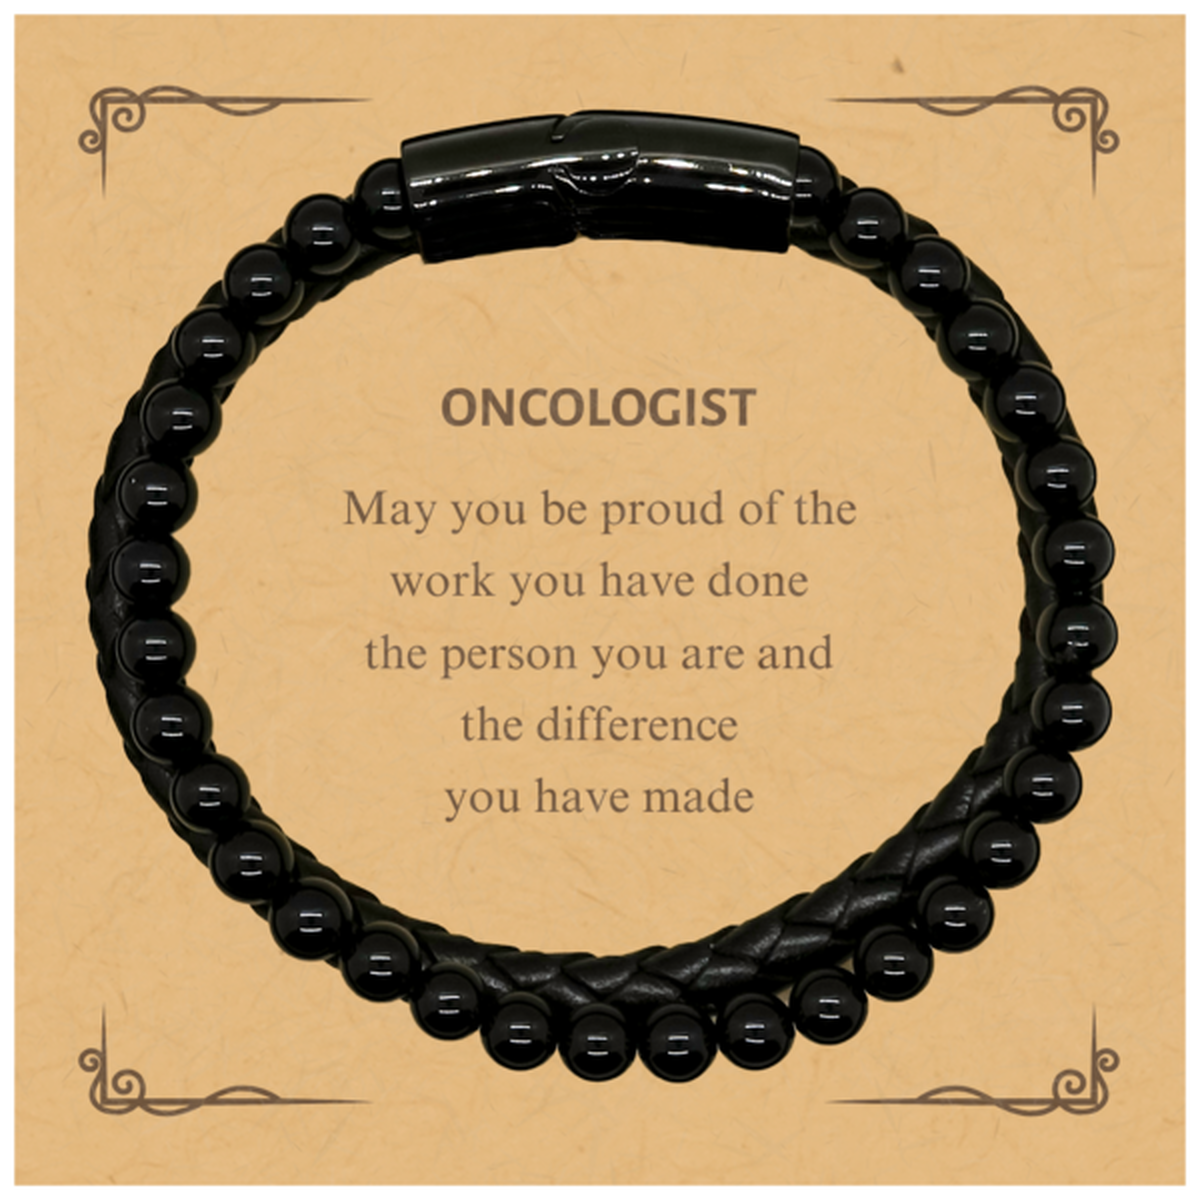 Oncologist May you be proud of the work you have done, Retirement Oncologist Stone Leather Bracelets for Colleague Appreciation Gifts Amazing for Oncologist